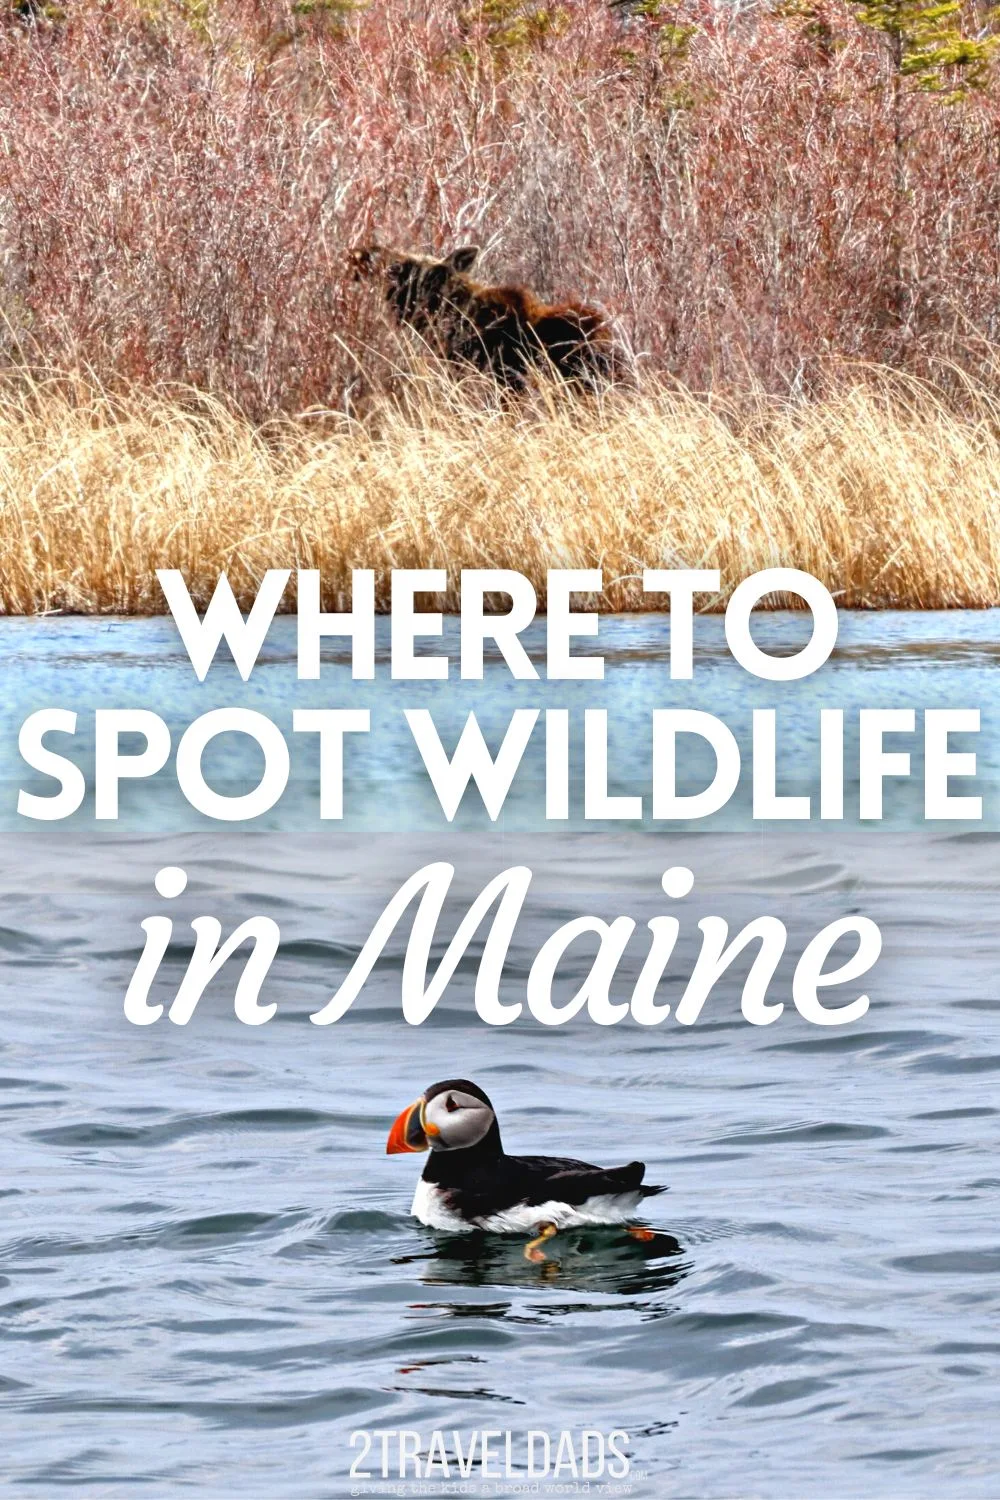 There is a lot of wildlife in Maine if you are patient and know where to look. Between unique animals, including moose and puffins, and more common but still amazing wildlife, such as black bears, this guide will help you spot them all (with some luck!).